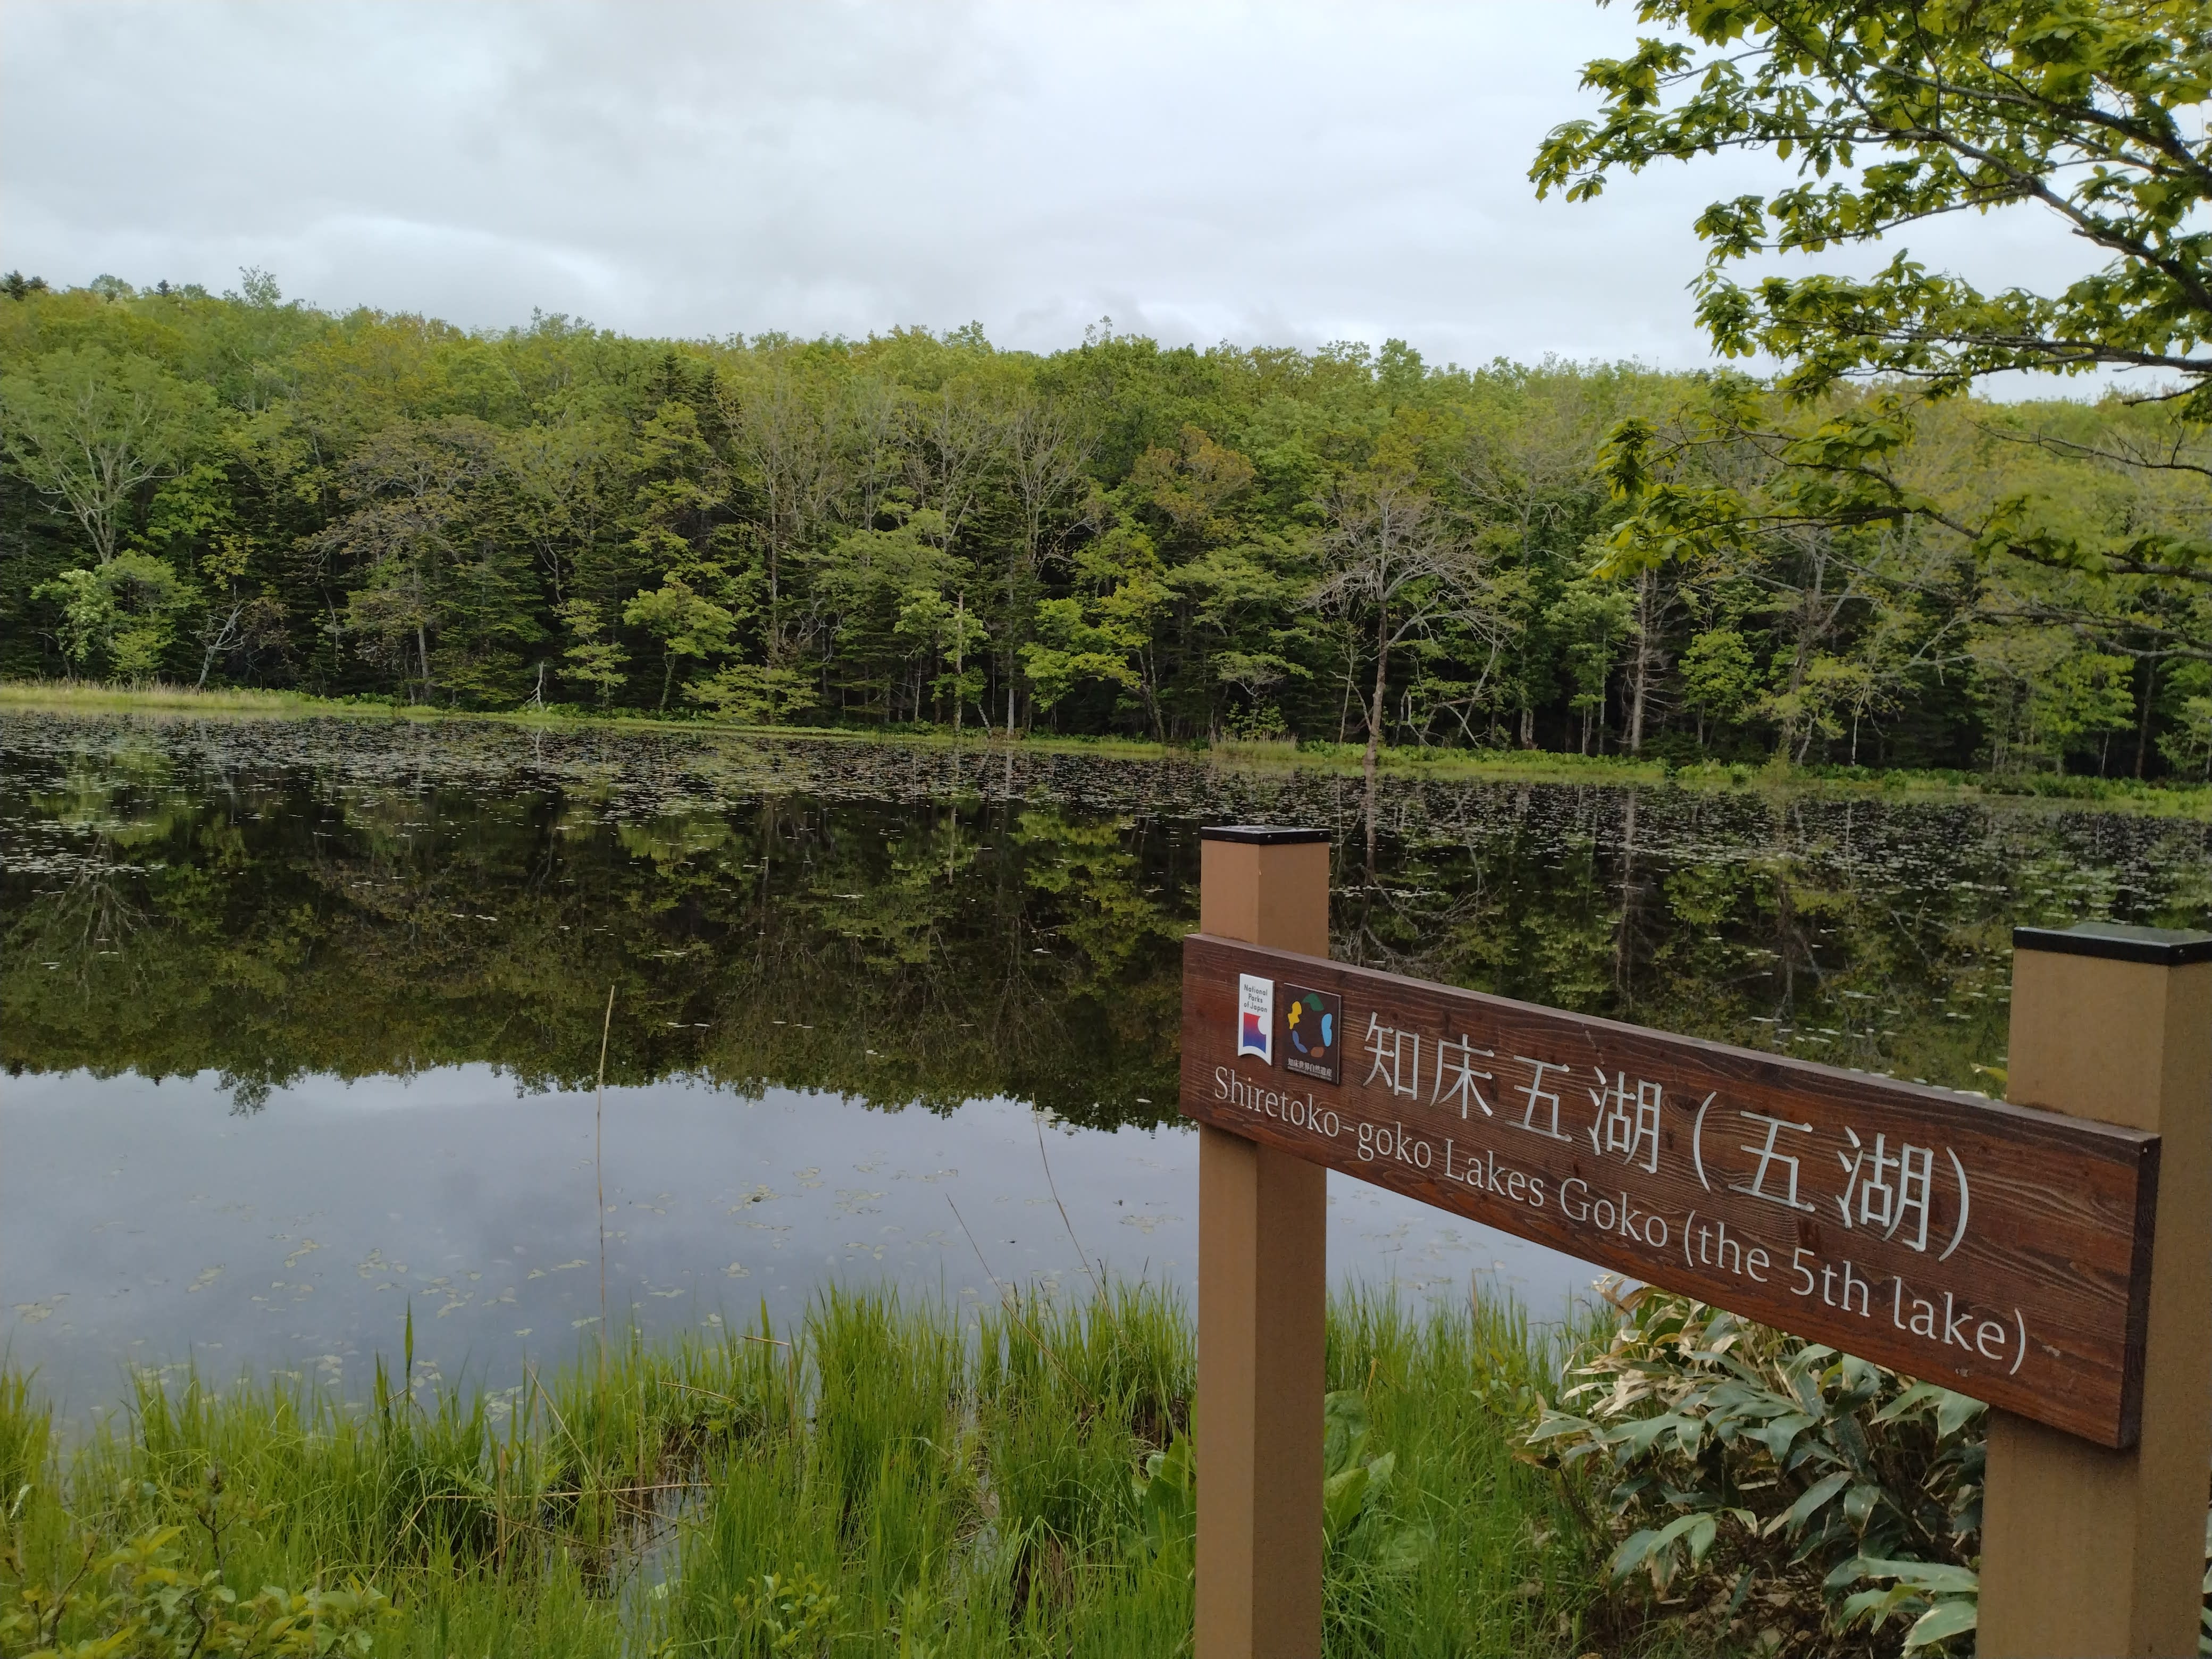 A wooden sign in front of a small lake with a forest on the far side. The sign reads "Shiretoko-goko Lakes (the 5th Lake)" in both English and Japanese.